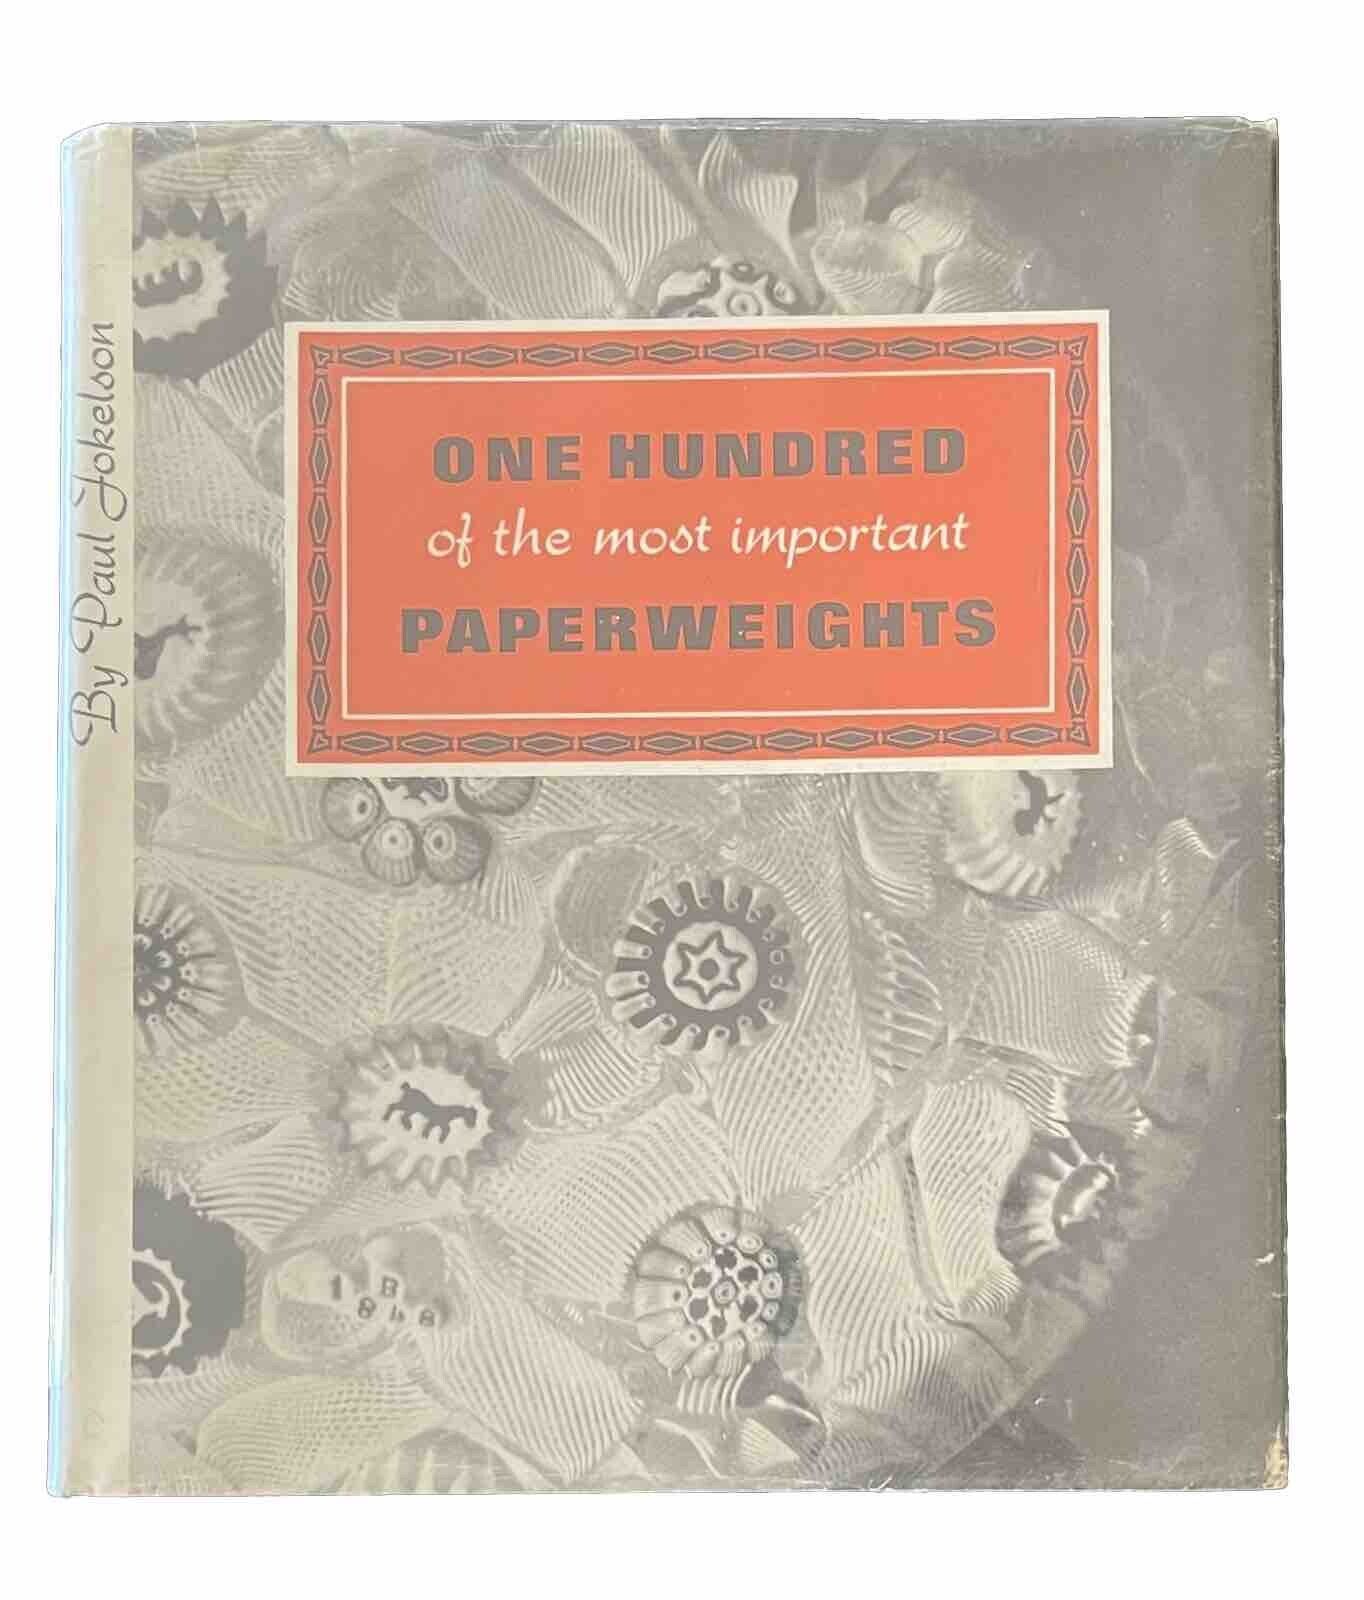 One Hundred of the Most Important Paperweights by Paul Jokelson First Edition